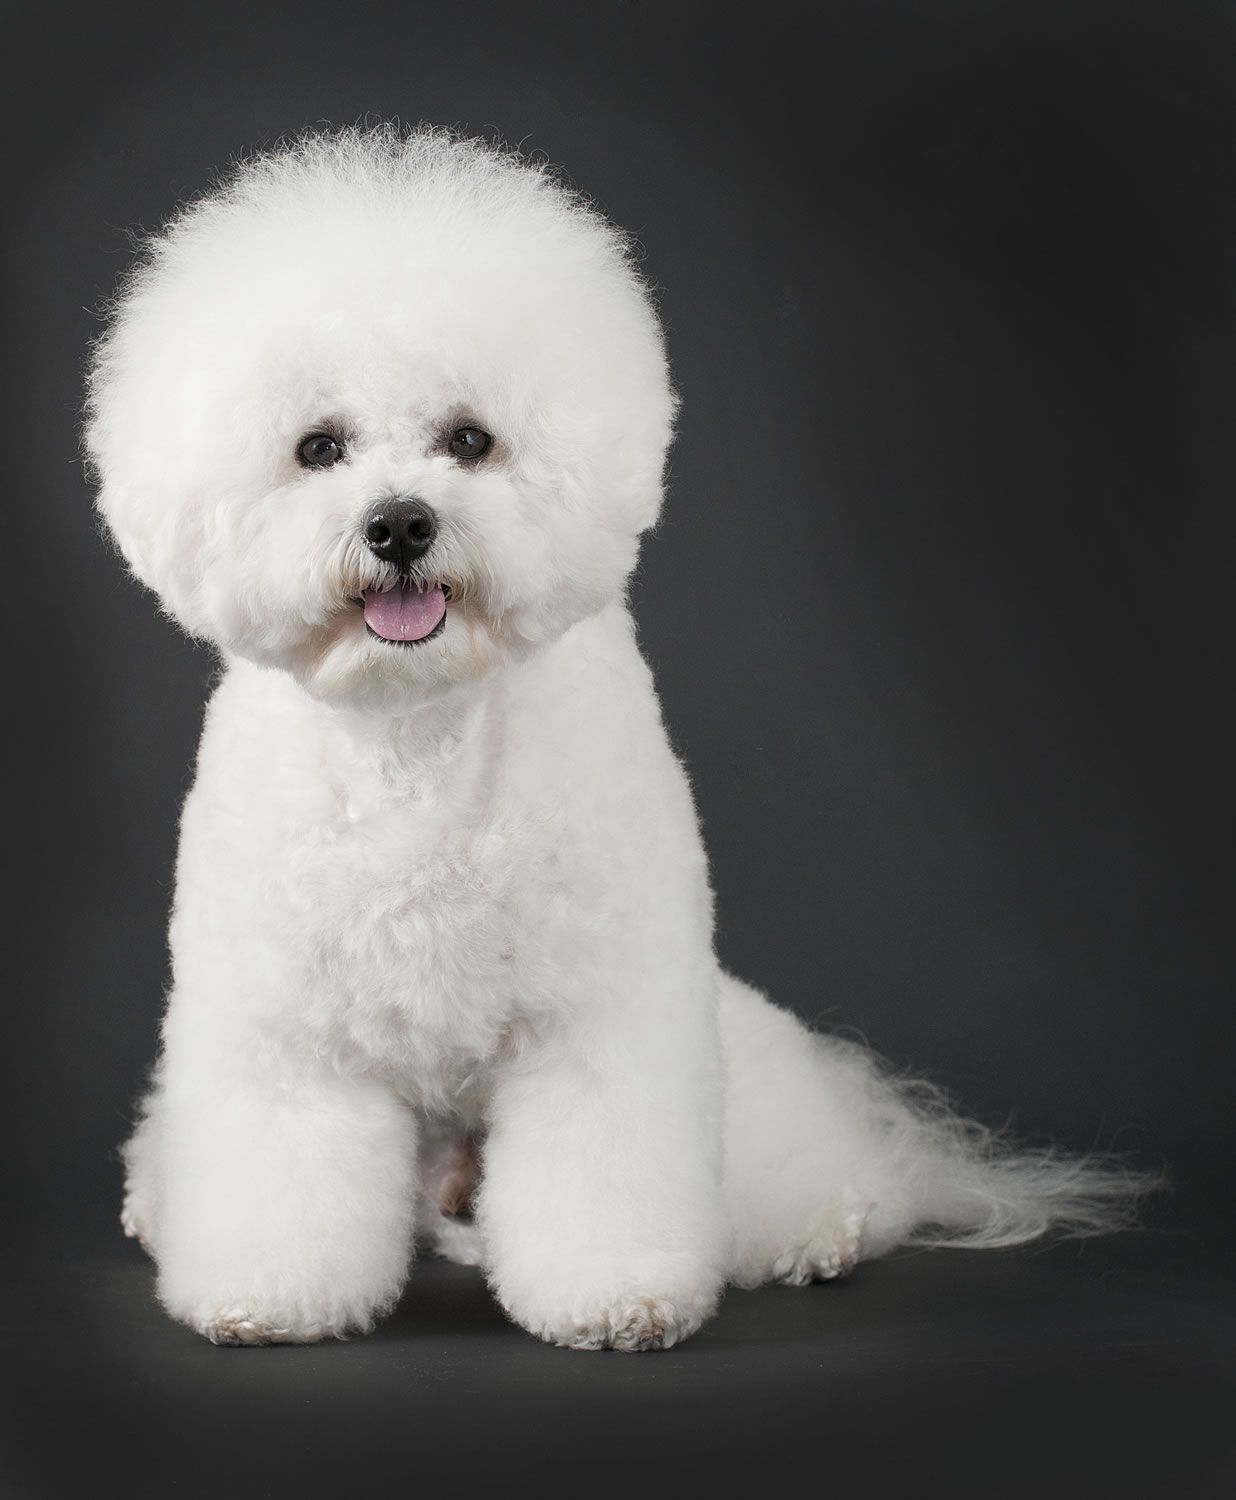 Gallery For > Bichon Frise Wallpaper